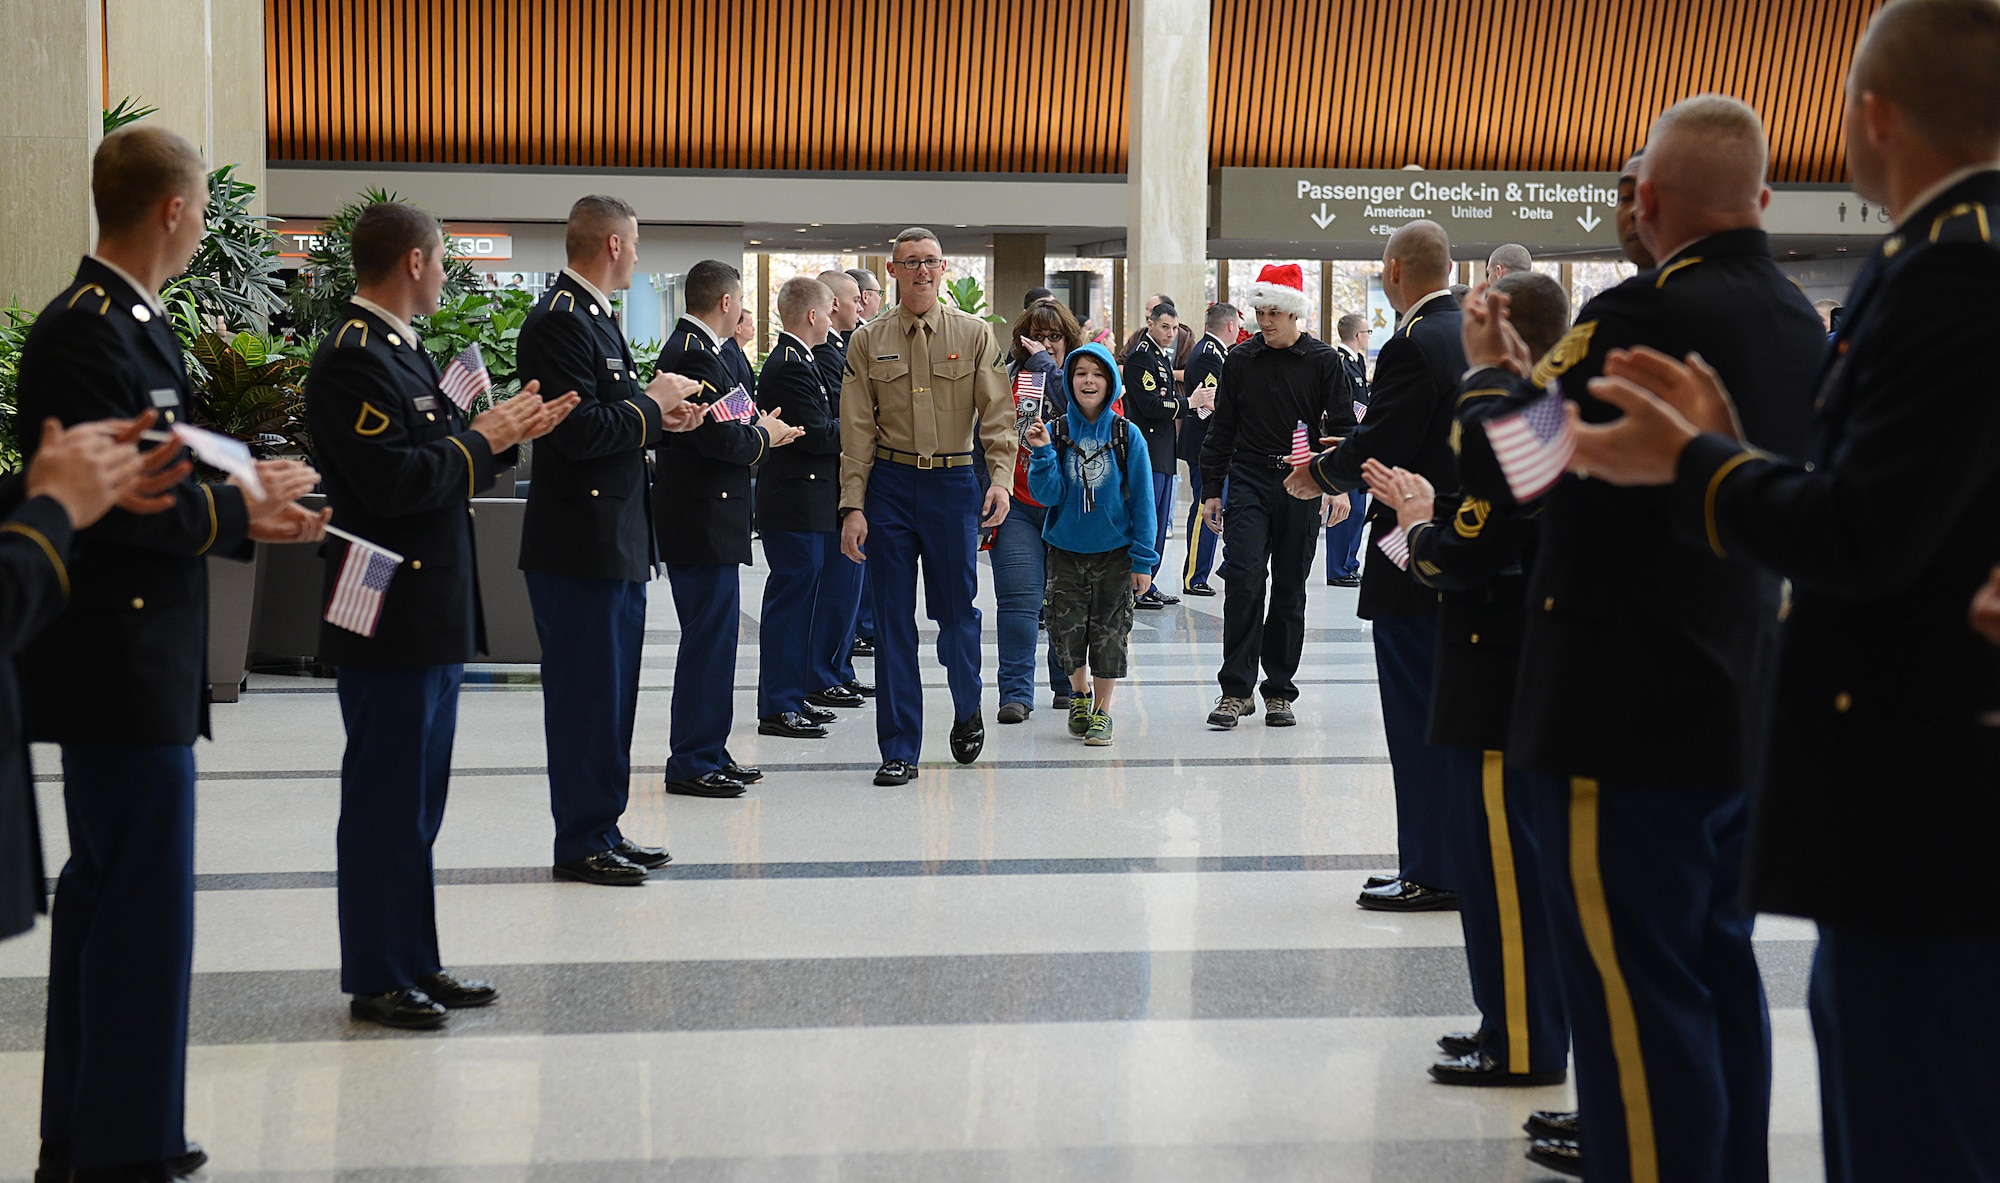 U.S. service members escort Gold Star families during the Snowball Express at Norfolk International Airport, Va., Dec. 11, 2016.  More than 300 service members and the Virginia Patriot Guard lined the airport to show support for the children of fallen service members. (U.S. Air Force photo by Staff Sgt. Teresa J. Cleveland)